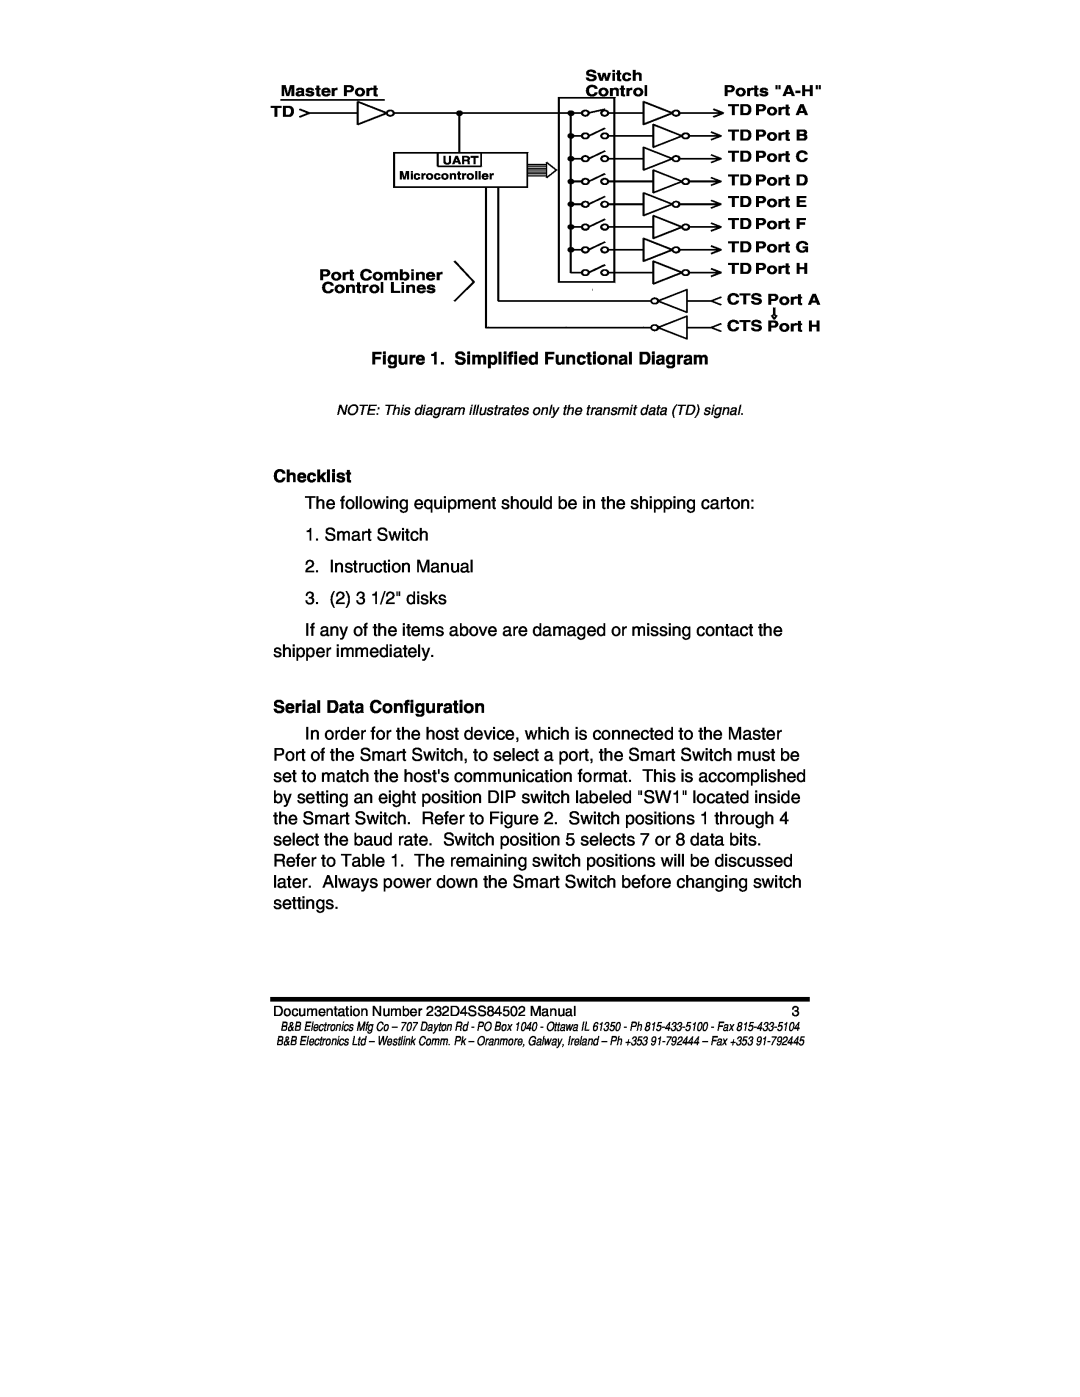 B&B Electronics 232D4SS8 manual Simplified Functional Diagram, Checklist, Serial Data Configuration 